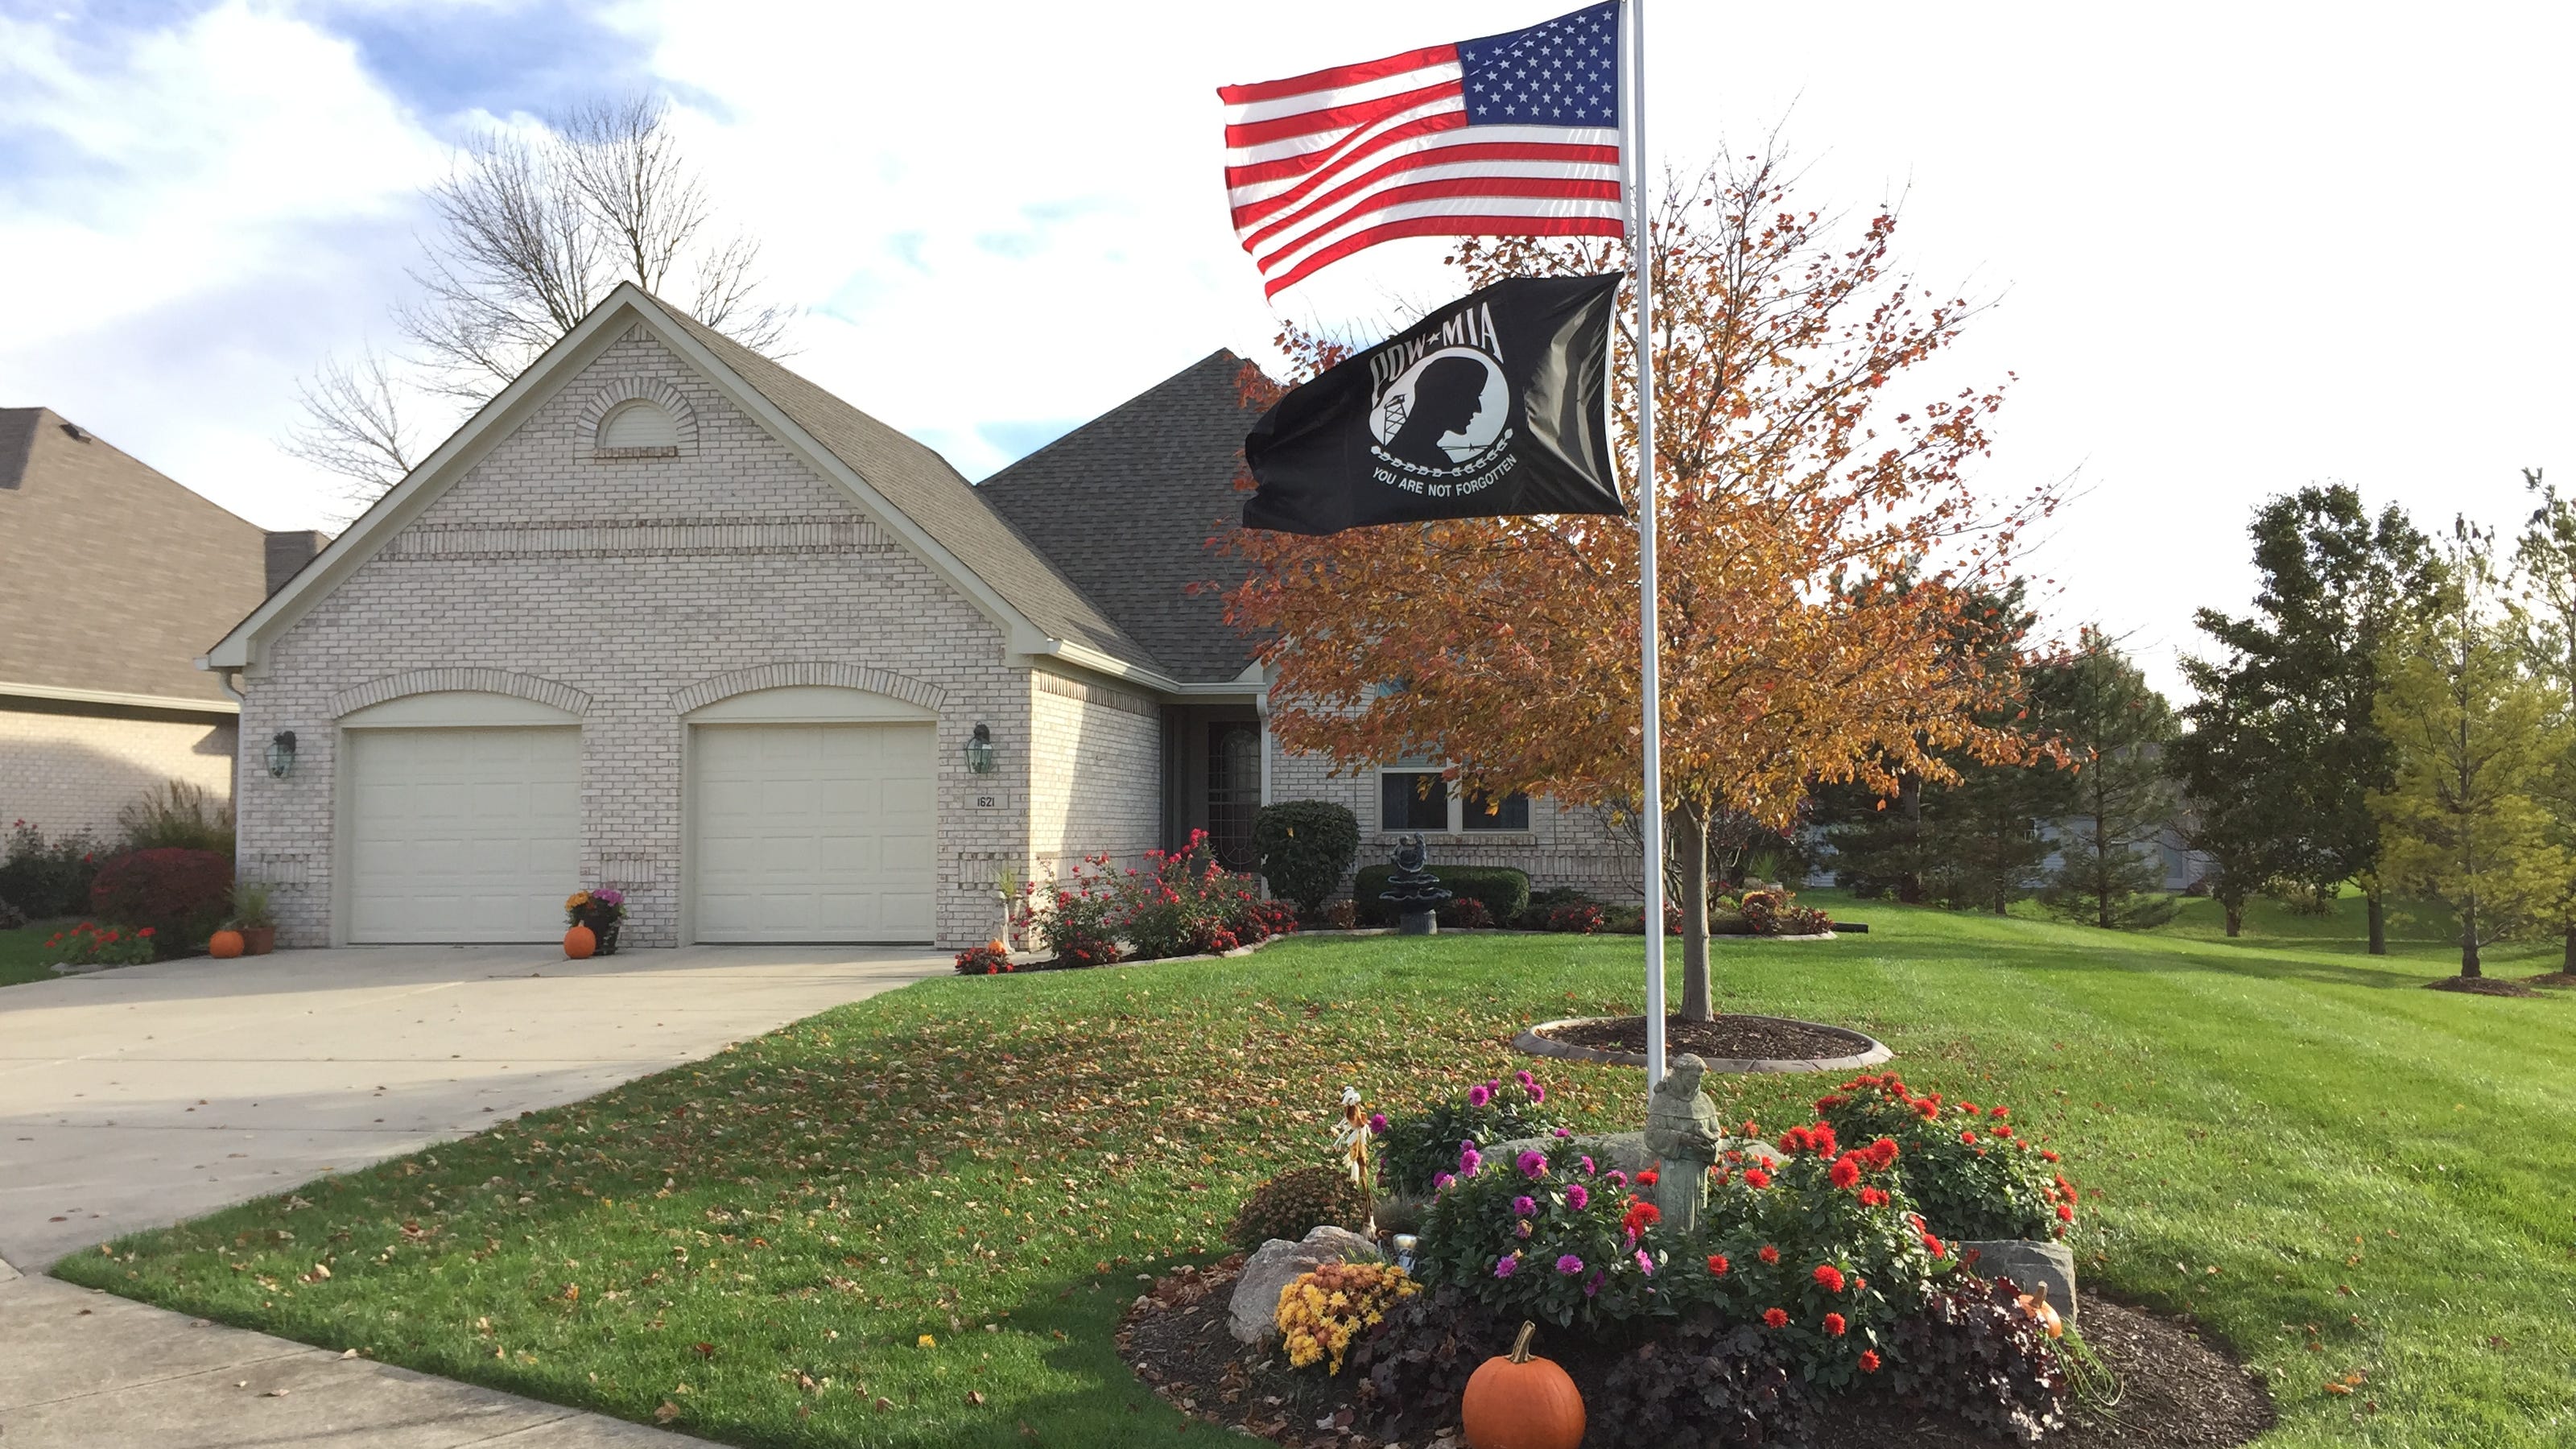 Greenfield Vet And Homeowners Association, Landscaping Around Flagpole